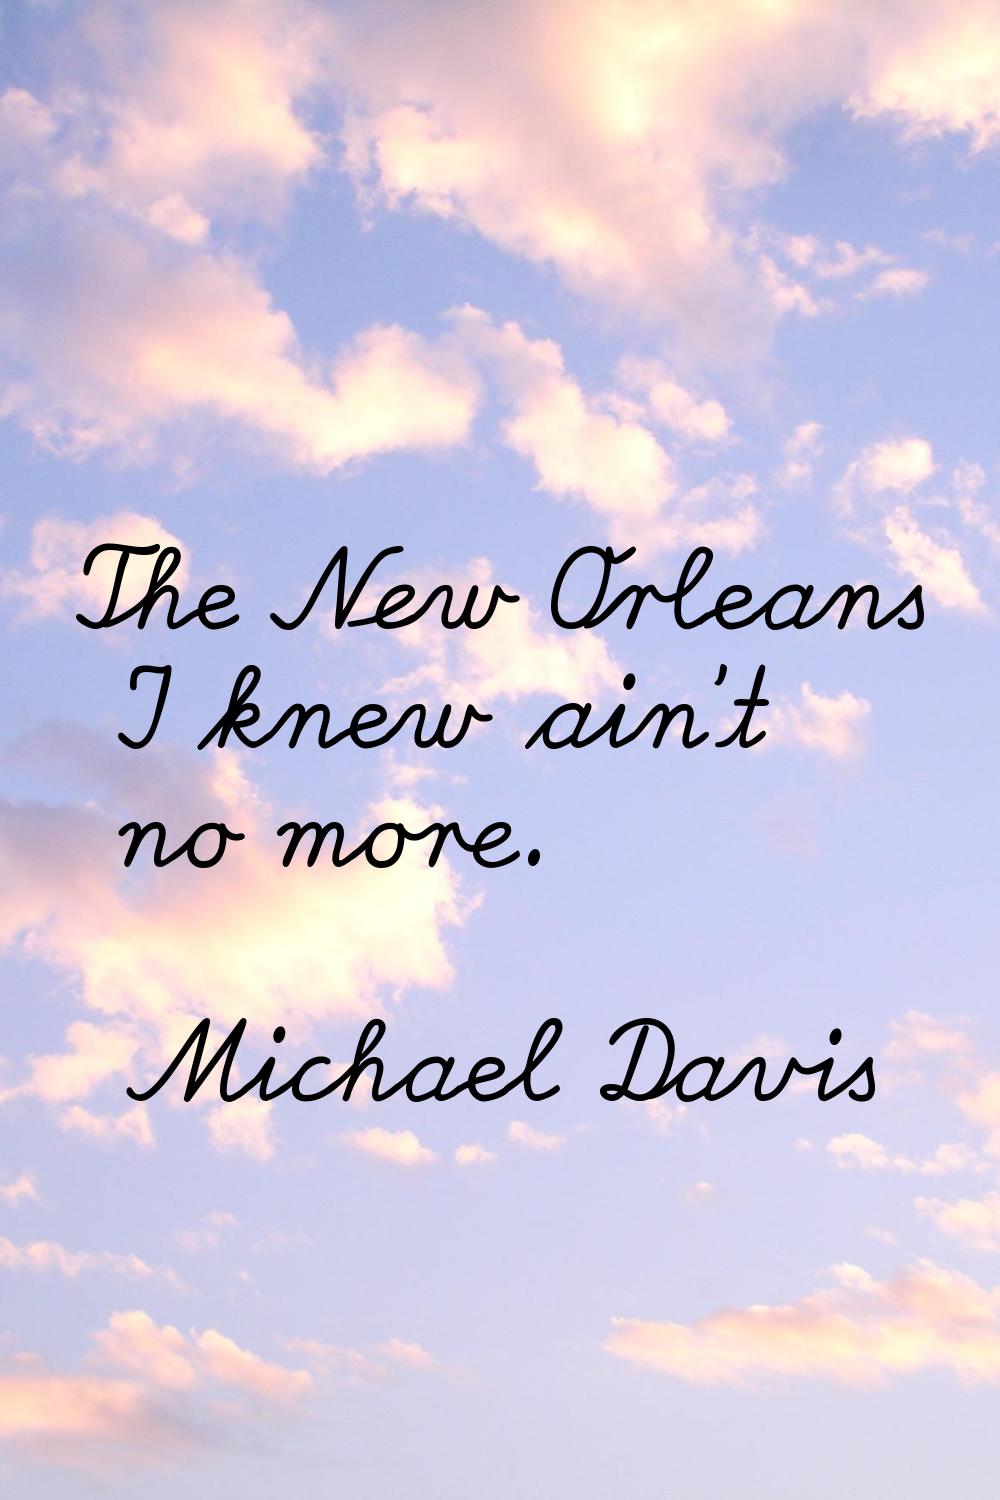 The New Orleans I knew ain't no more.